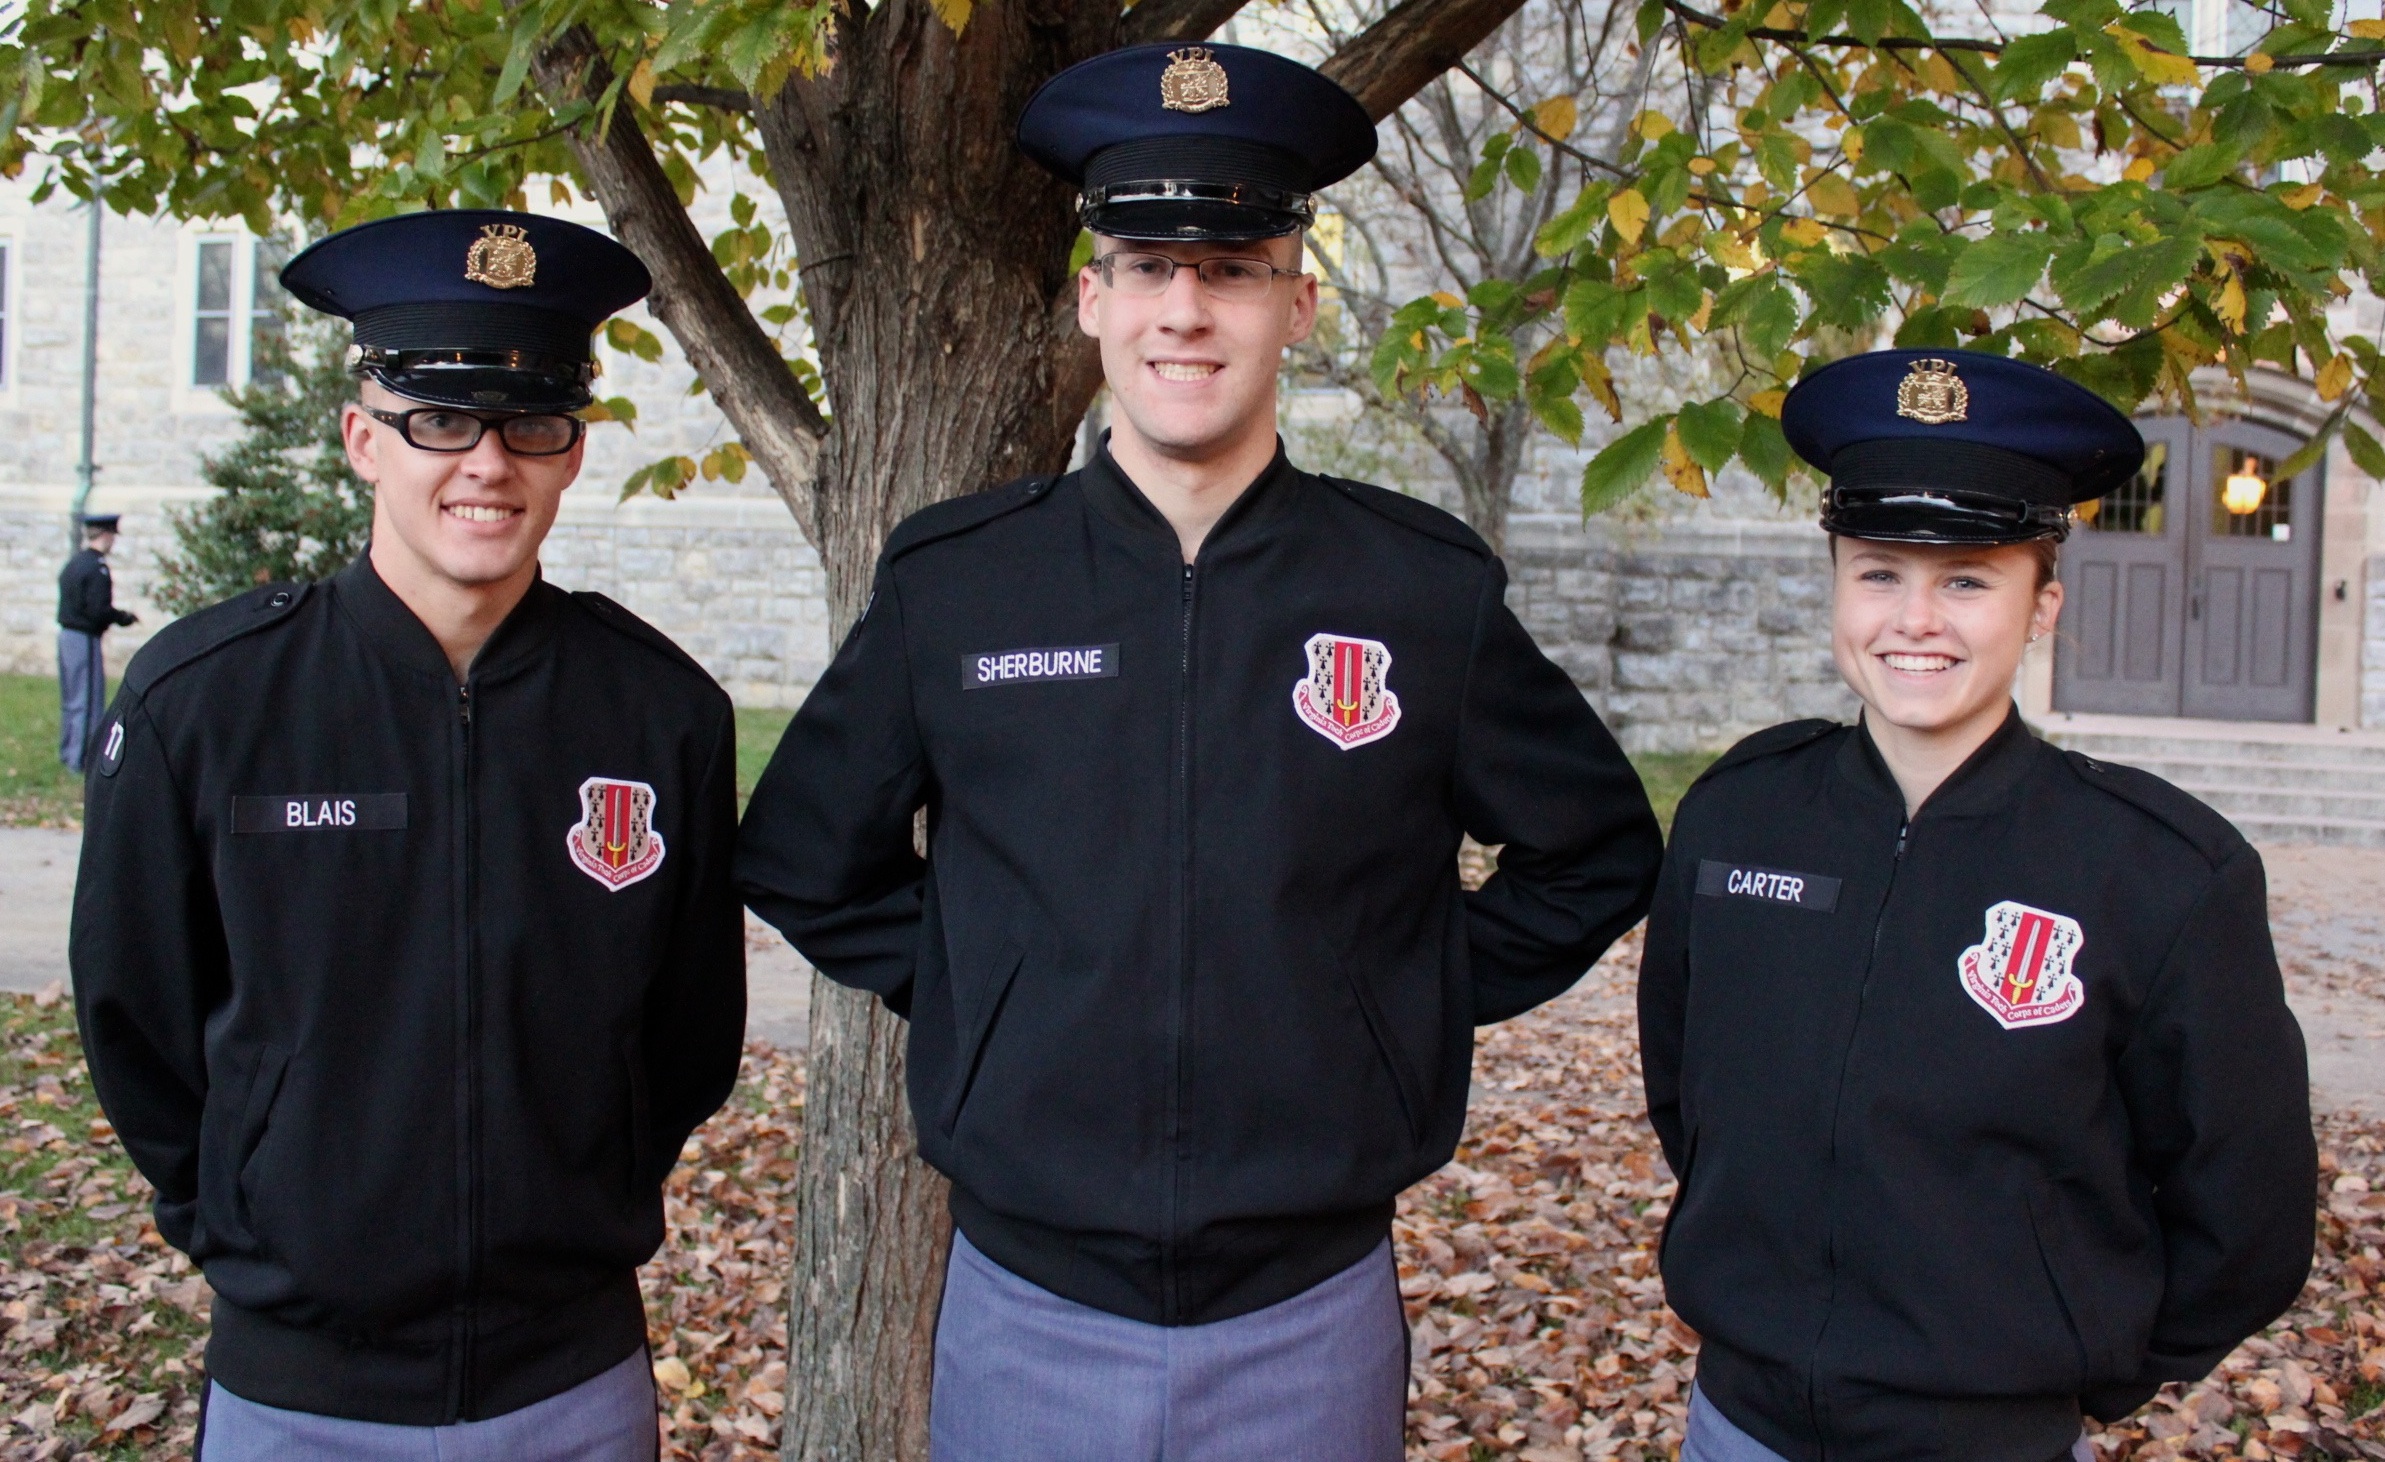 From left to right are Cadets Chas Blais, Michael Sherburne, and Amanda Carter in the Eggleston Quad.